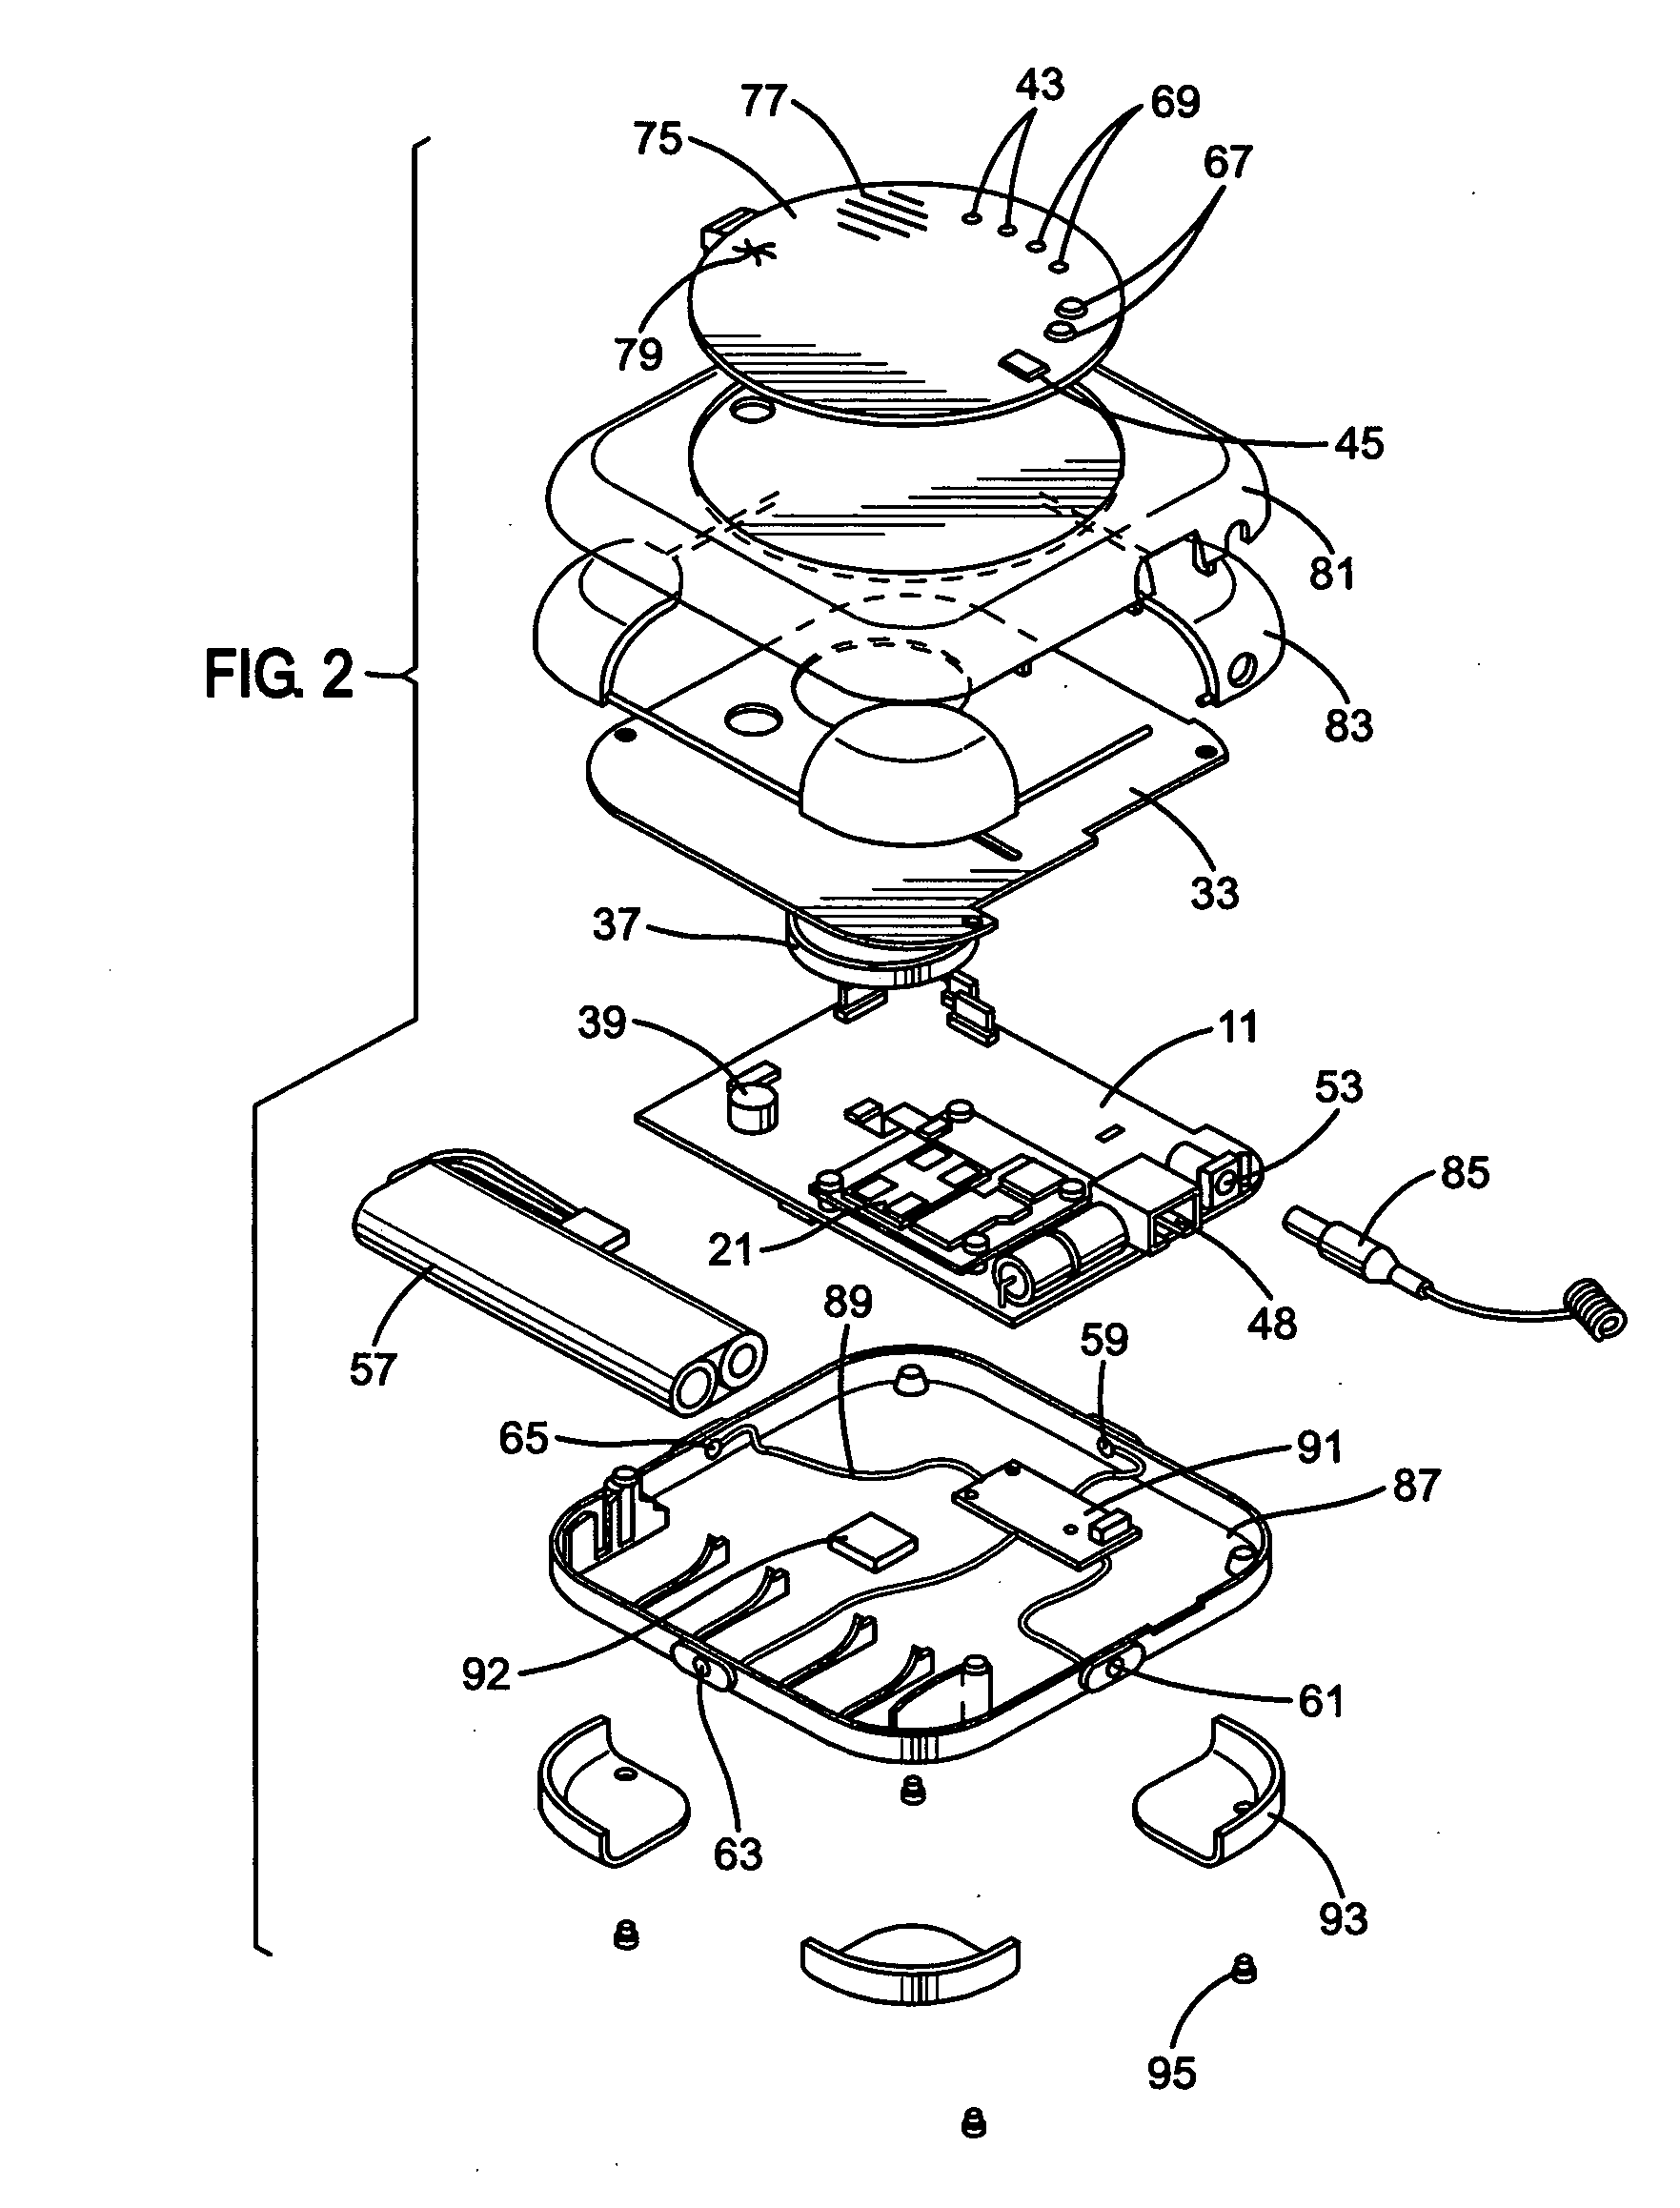 Electronic device for tracking and monitoring assets